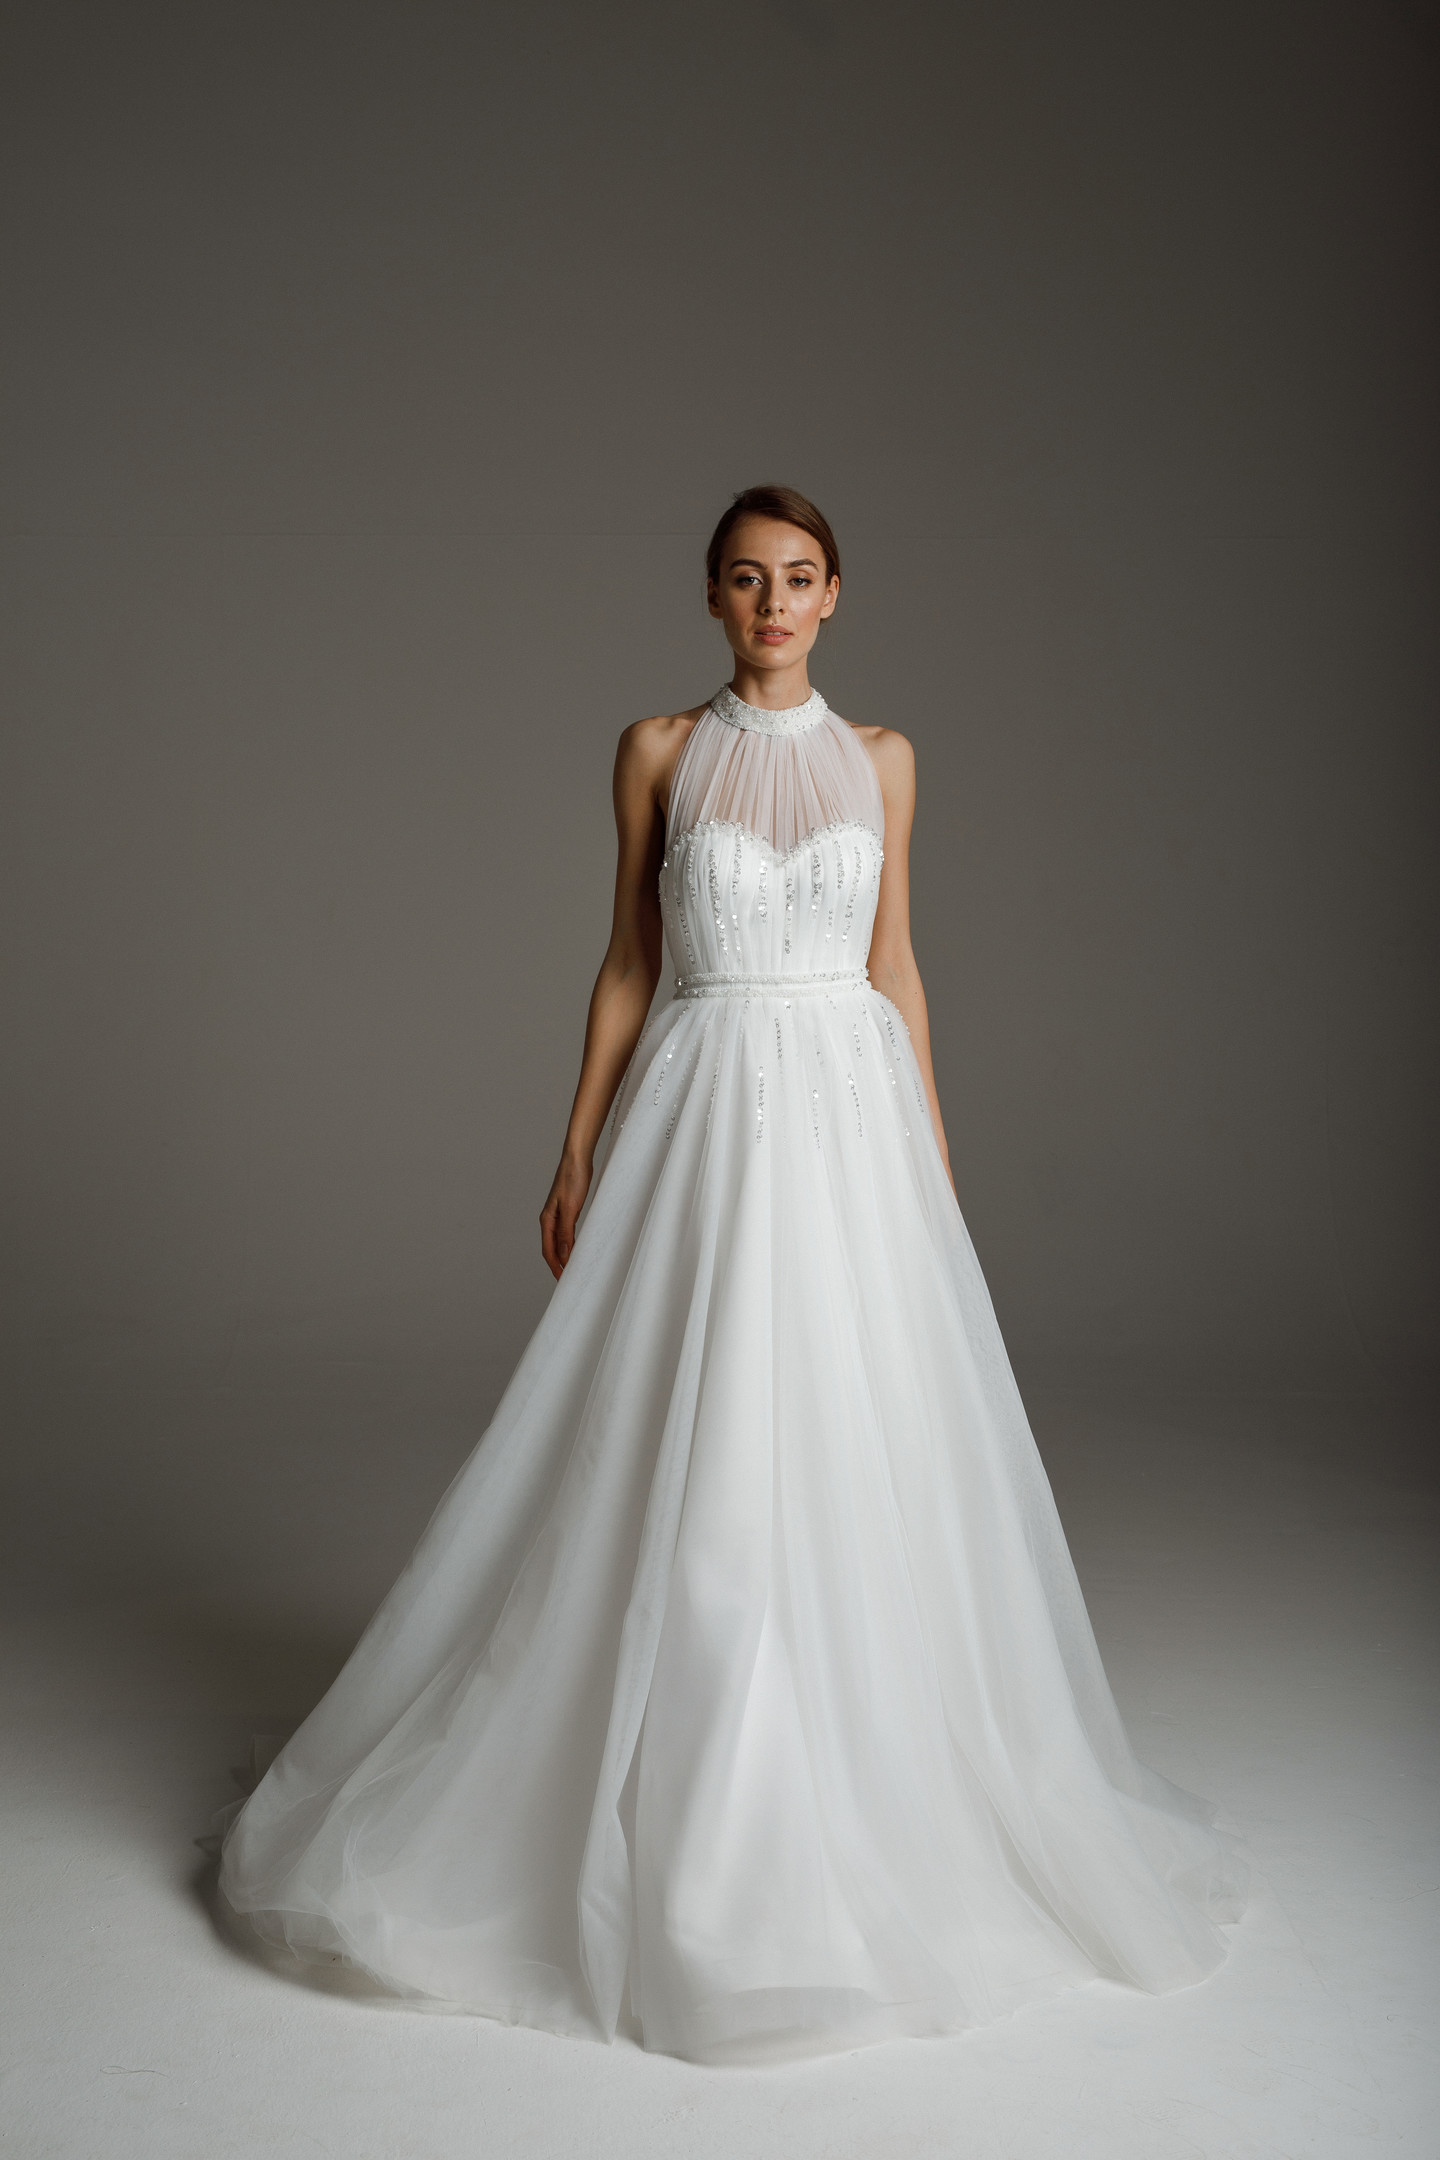 Louise gown, 2020, couture, dress, bridal, off-white, tulle, embroidery, A-line, satin